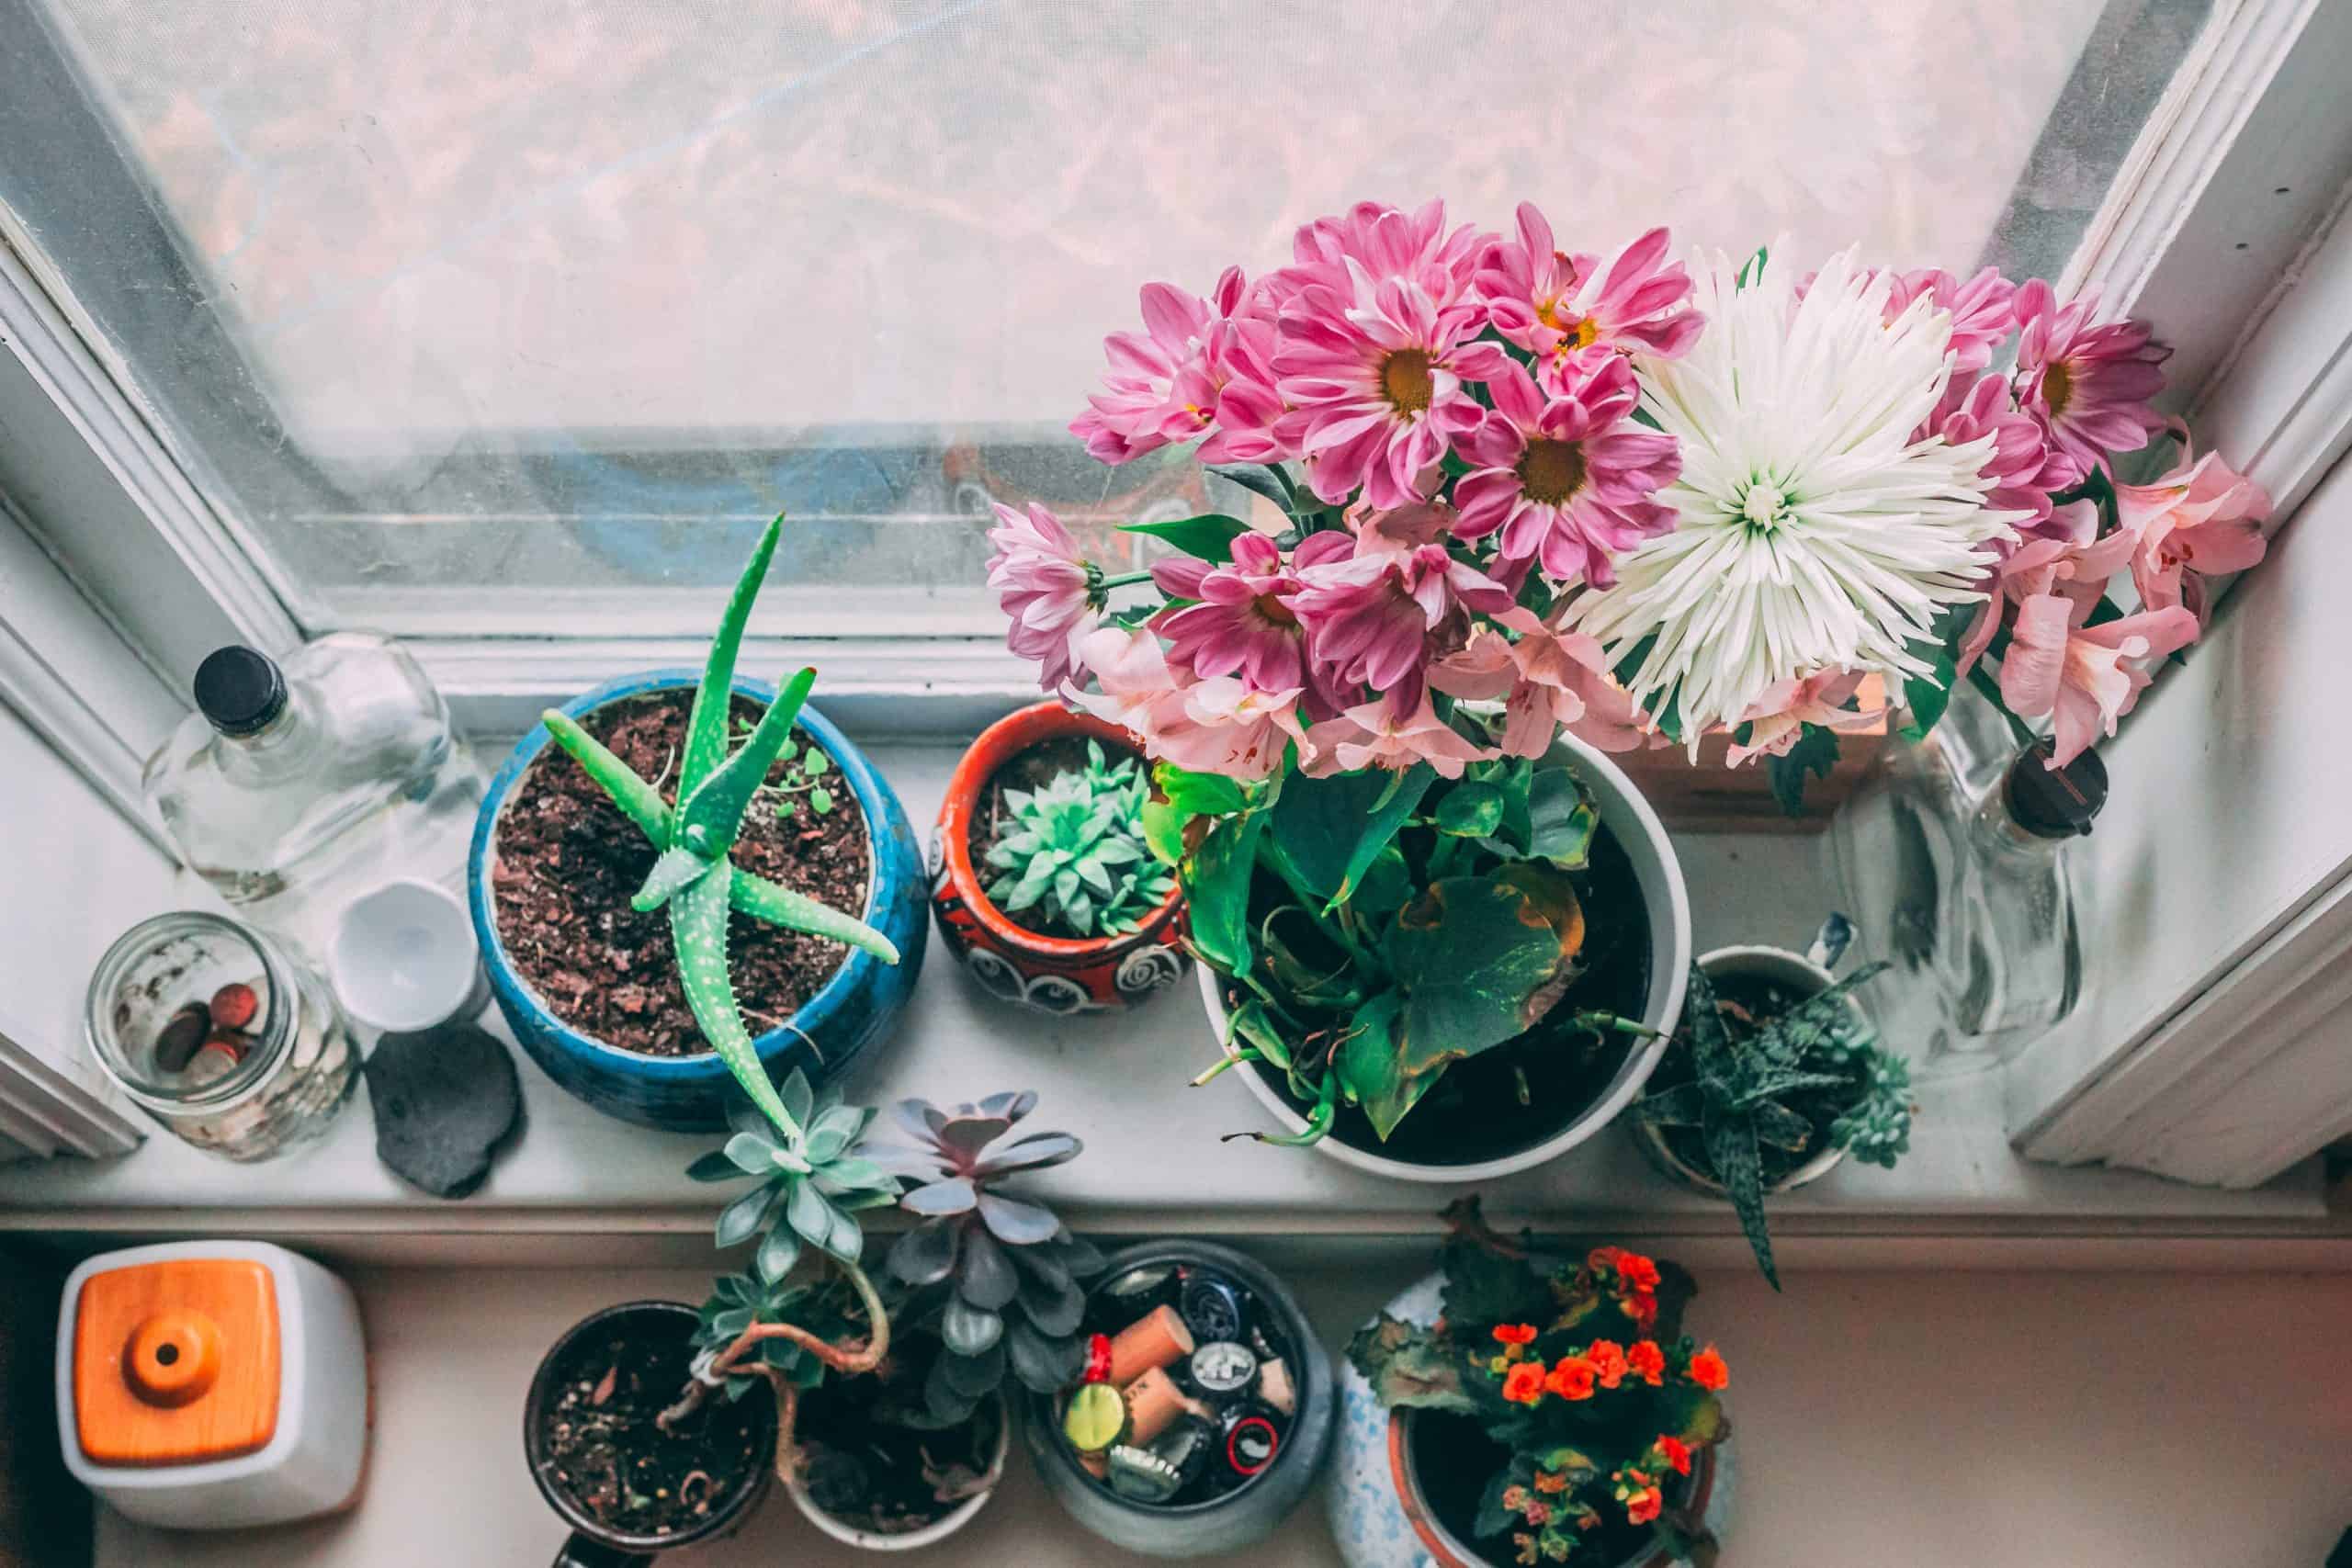 Best Light Cycle for Flowering Succulents